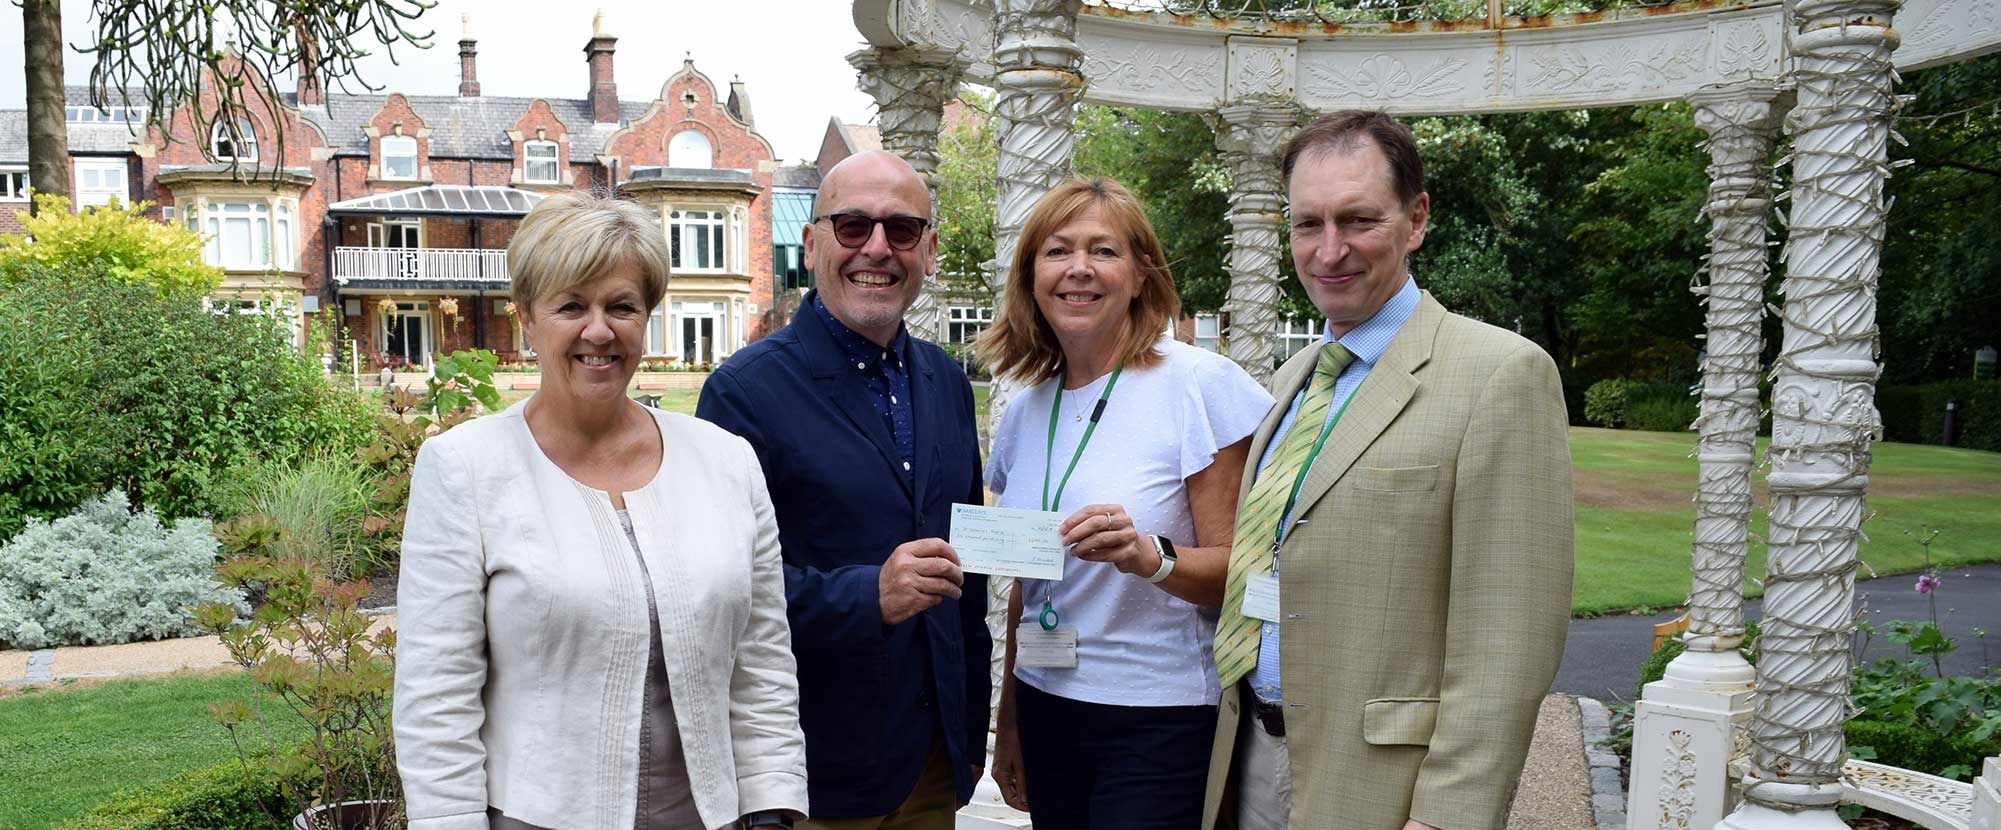 Former South Ribble mayor and mayoress Mick and Carole Titherington with St Catherine’s Hospice chief executive Stephen Greenhalgh and the charity’s director of community and income, Lorraine Charlesworth